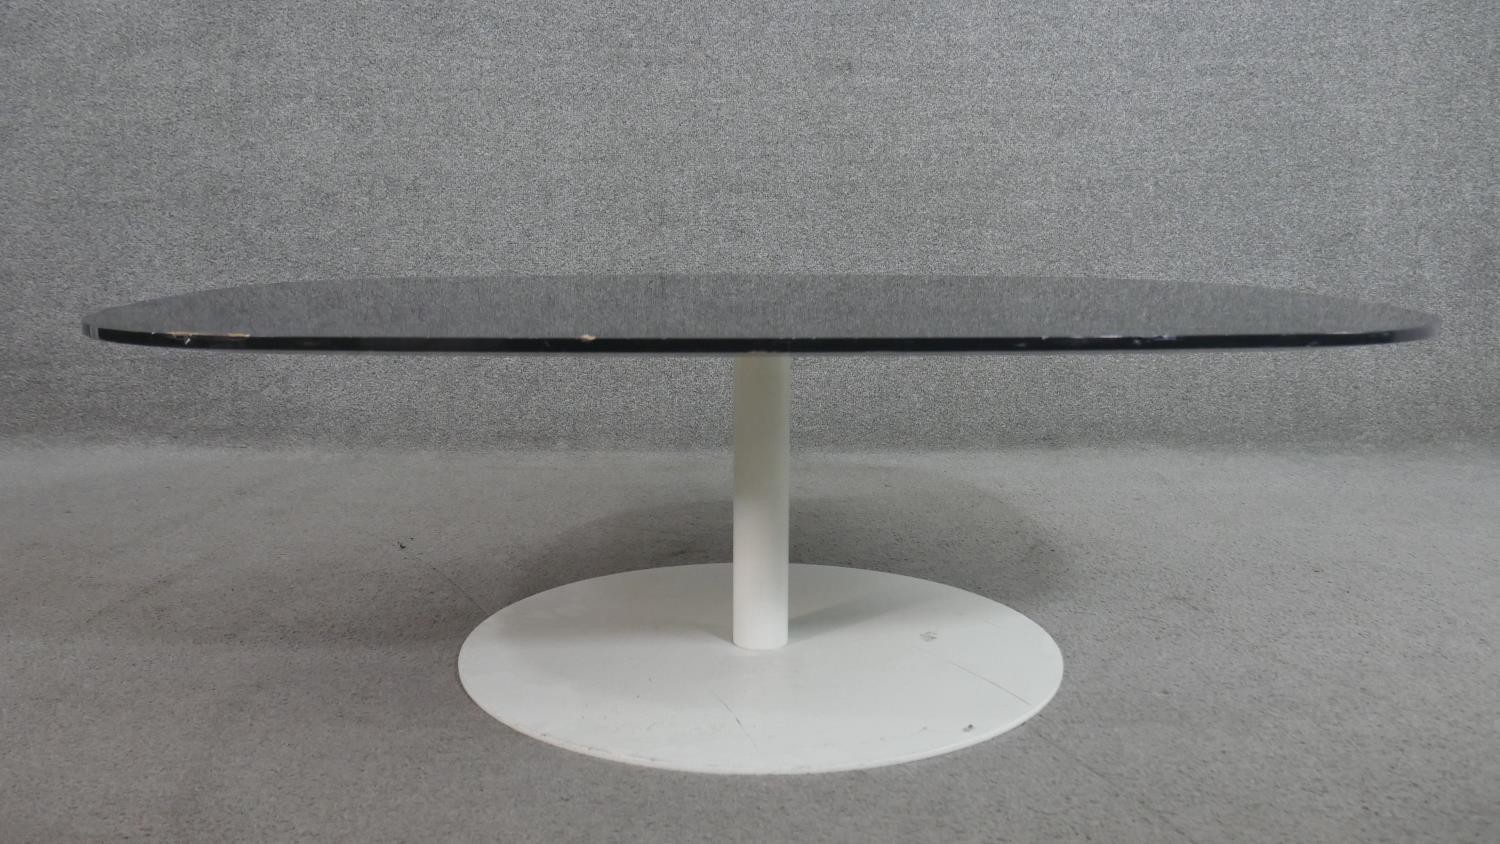 Piero Lissoni for Fritz Hansen, a Tulip style coffee table, Denmark 2006, with a curved smoked glass